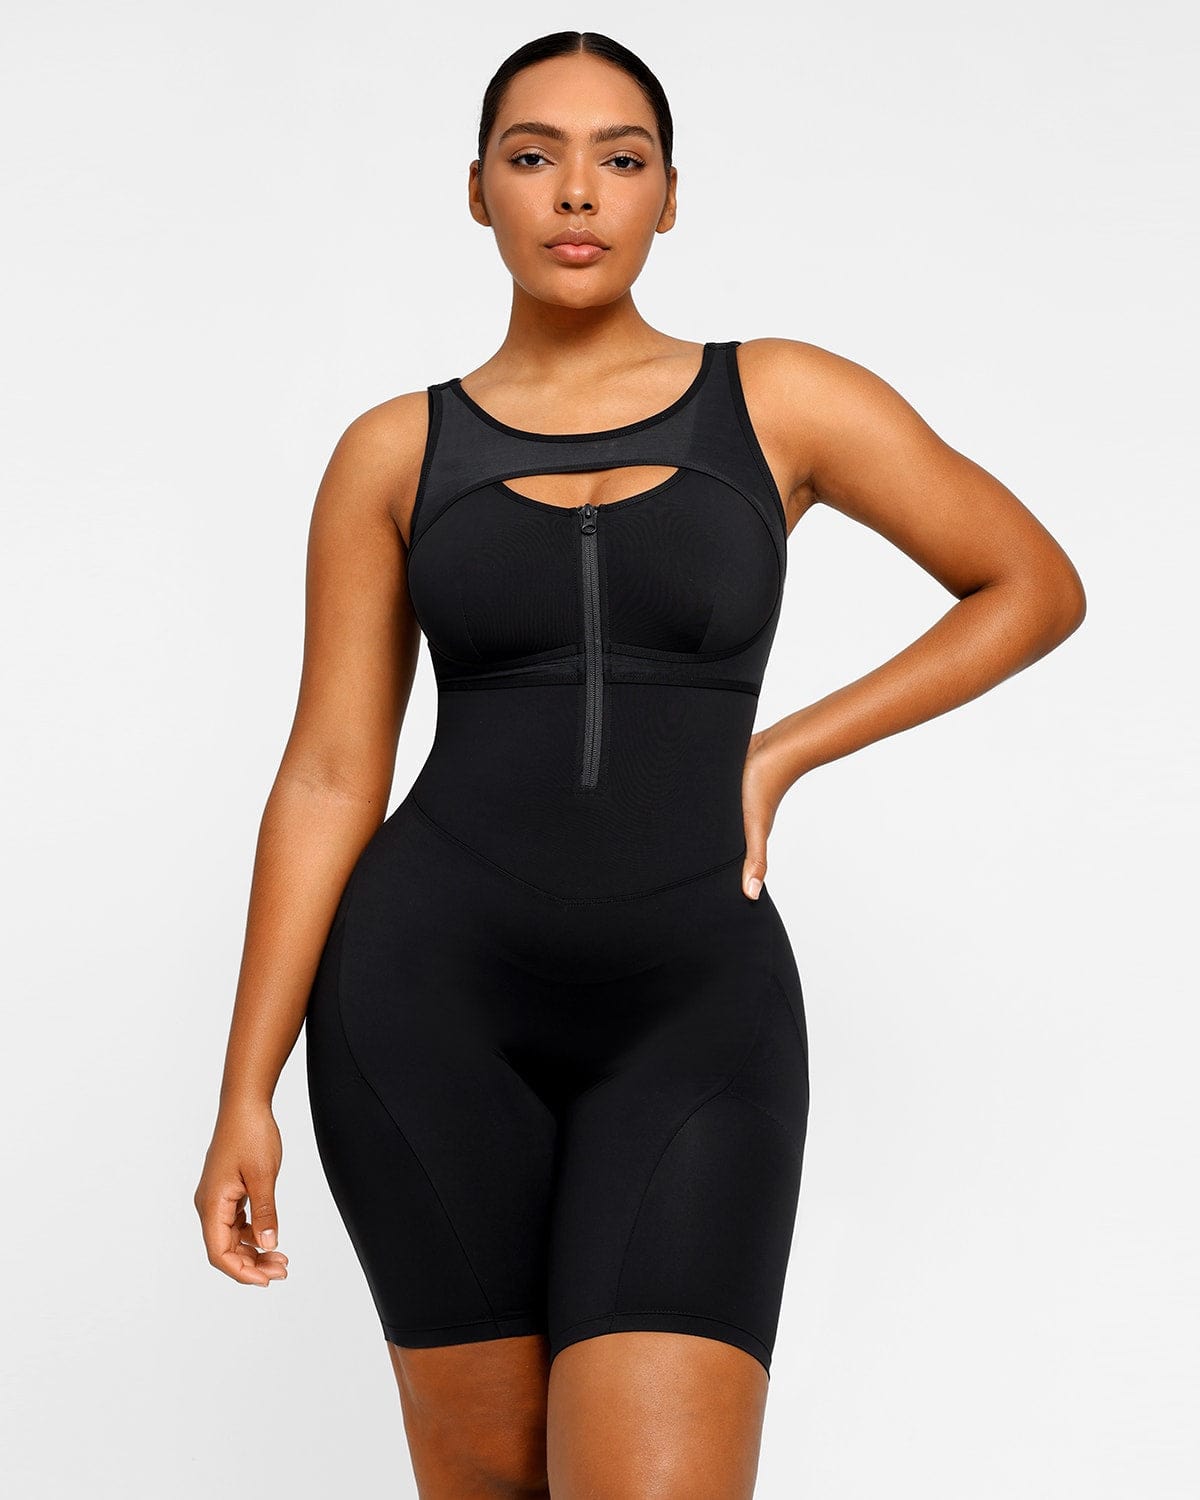 Gym Jumpsuits - AirSlim® PowerFit Supportive Workout Jumpsuit